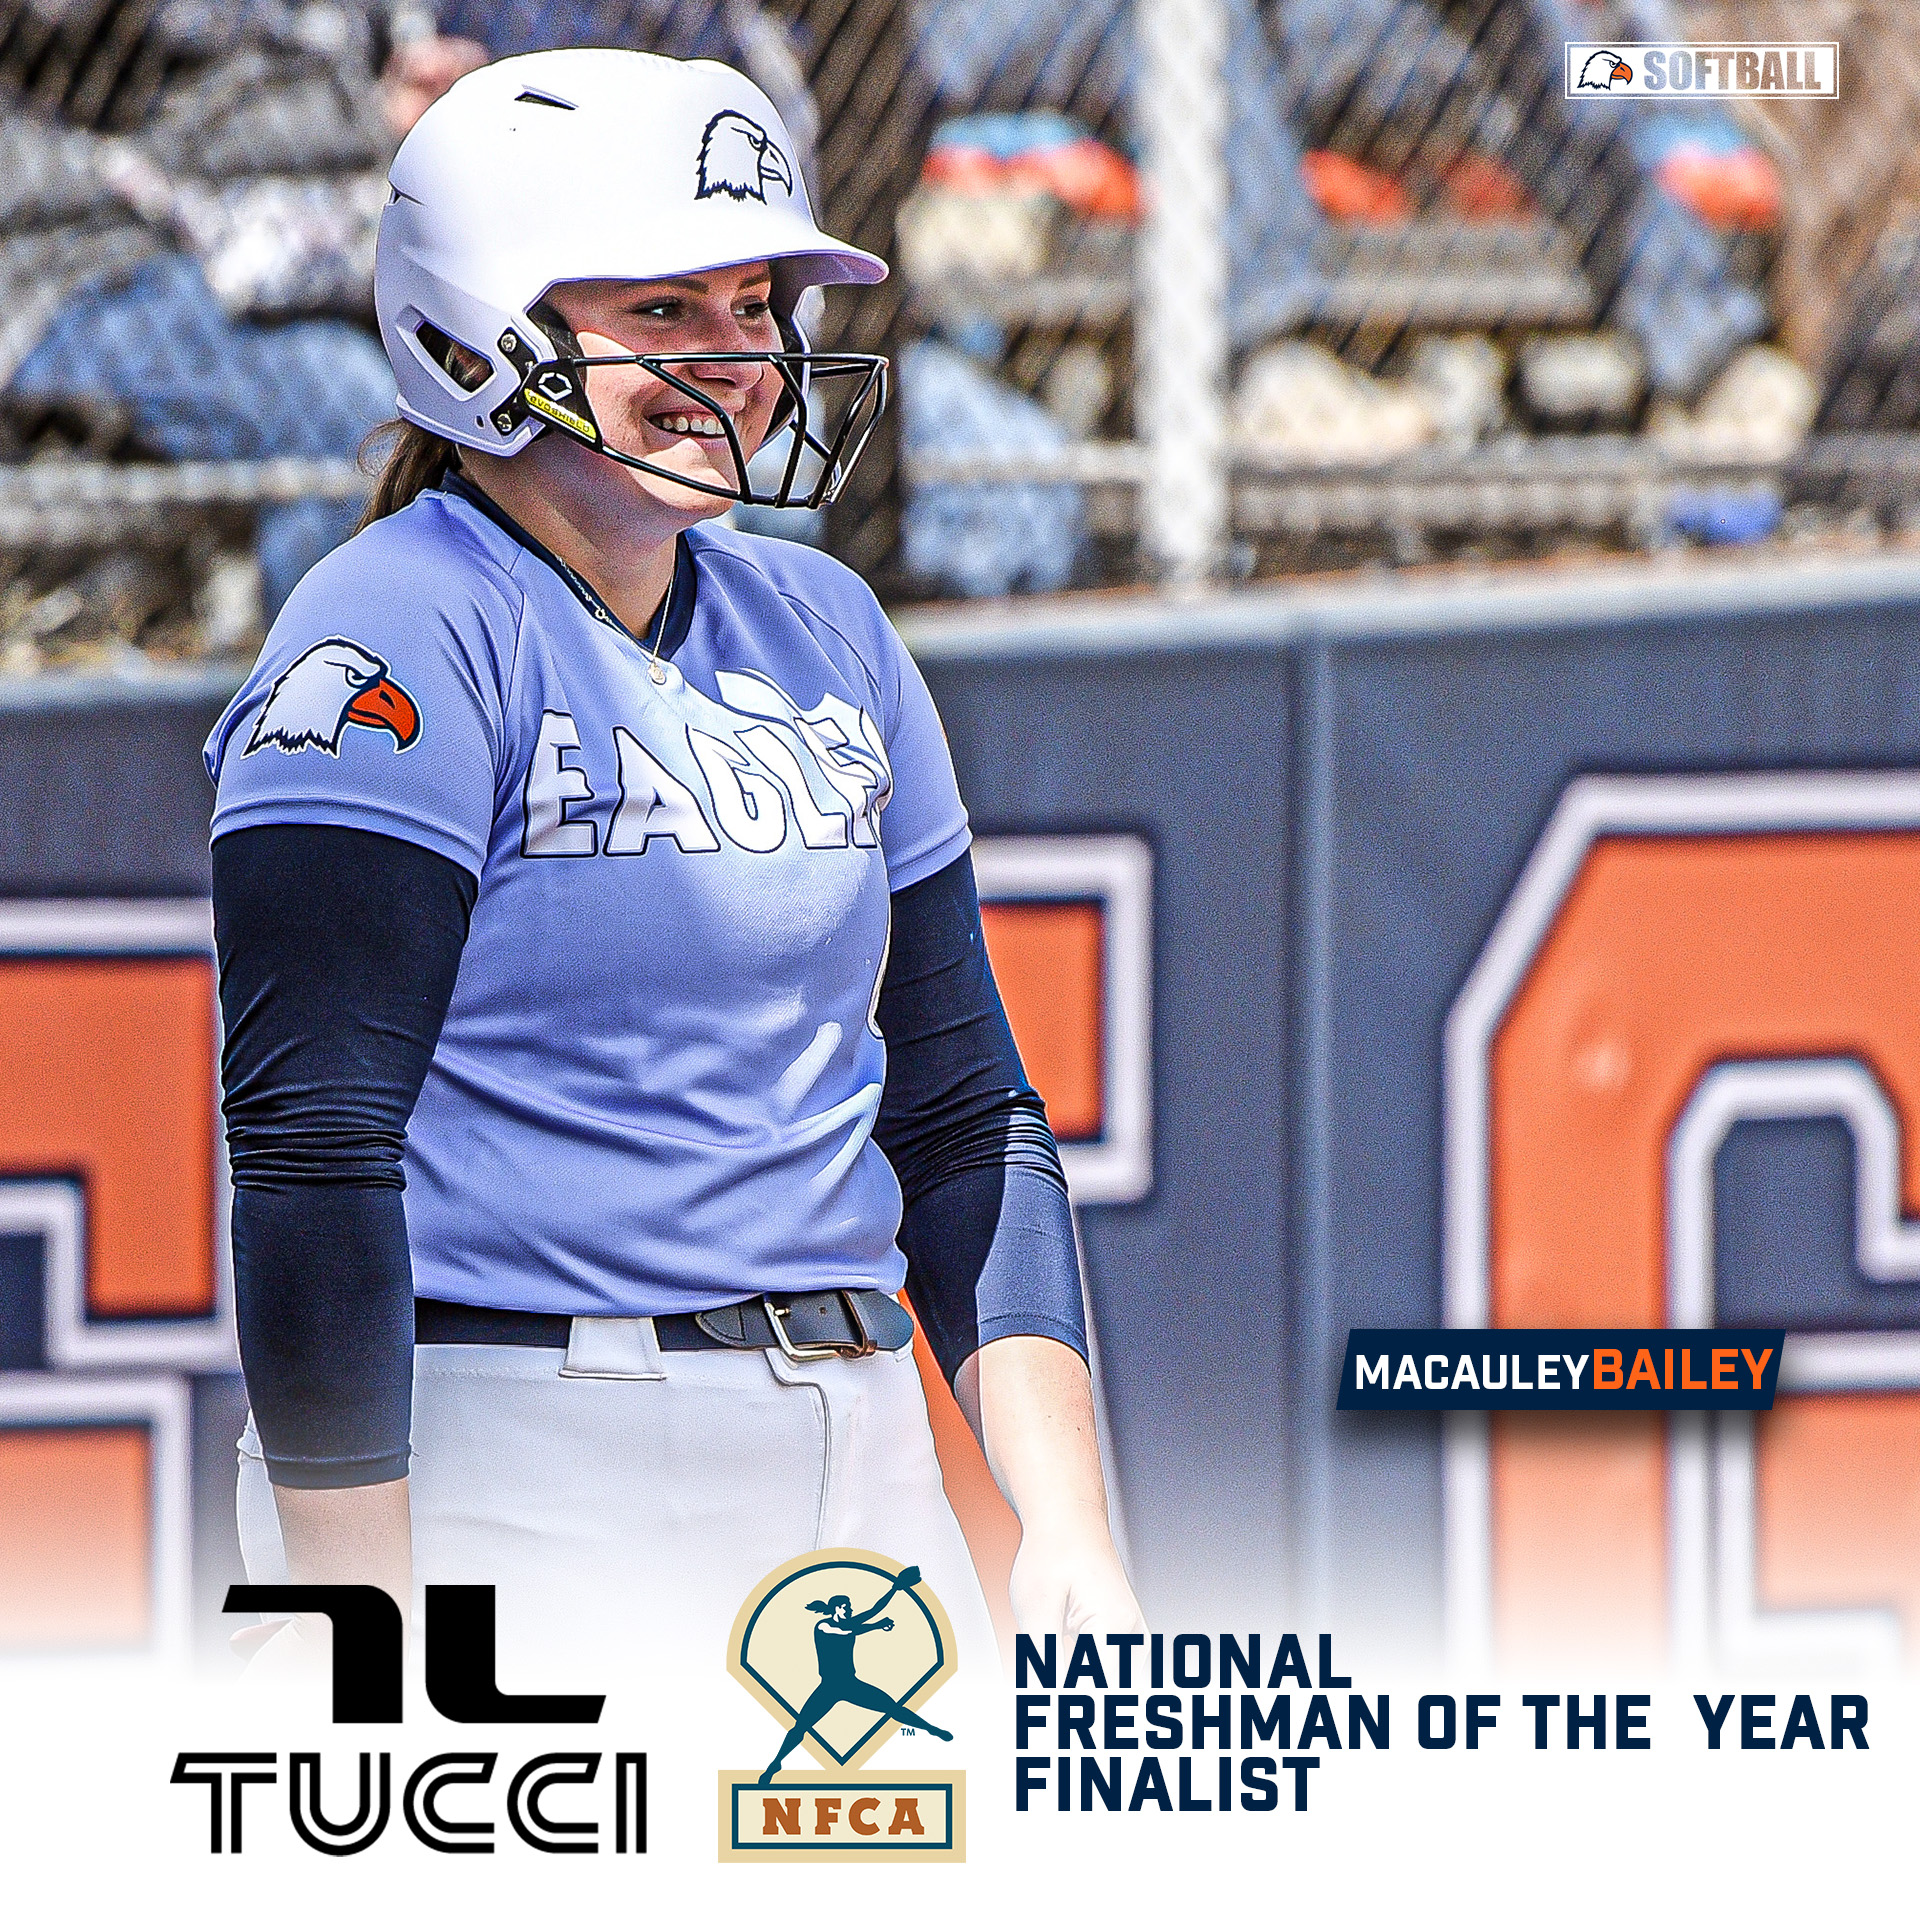 Bailey named finalist for TUCCI/NFCA Division II Freshman of the Year